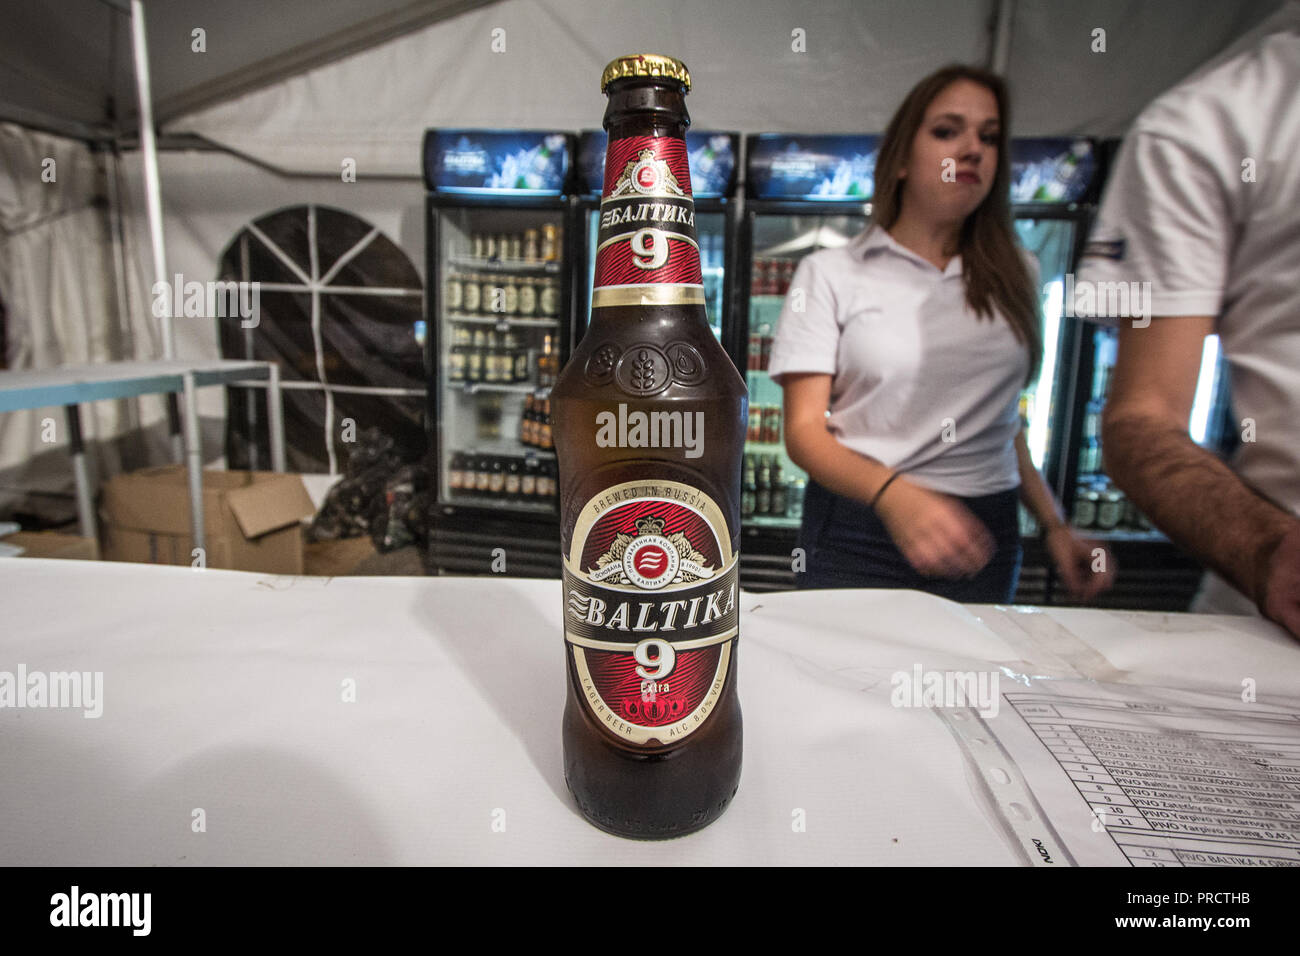 BELGRADE, SERBIA - AUGUST 19, 2018:  Baltika 9 logo on on a beer bottle. Baltika 9 is a strong lager, export style, brewed in Russia, and one of the s Stock Photo